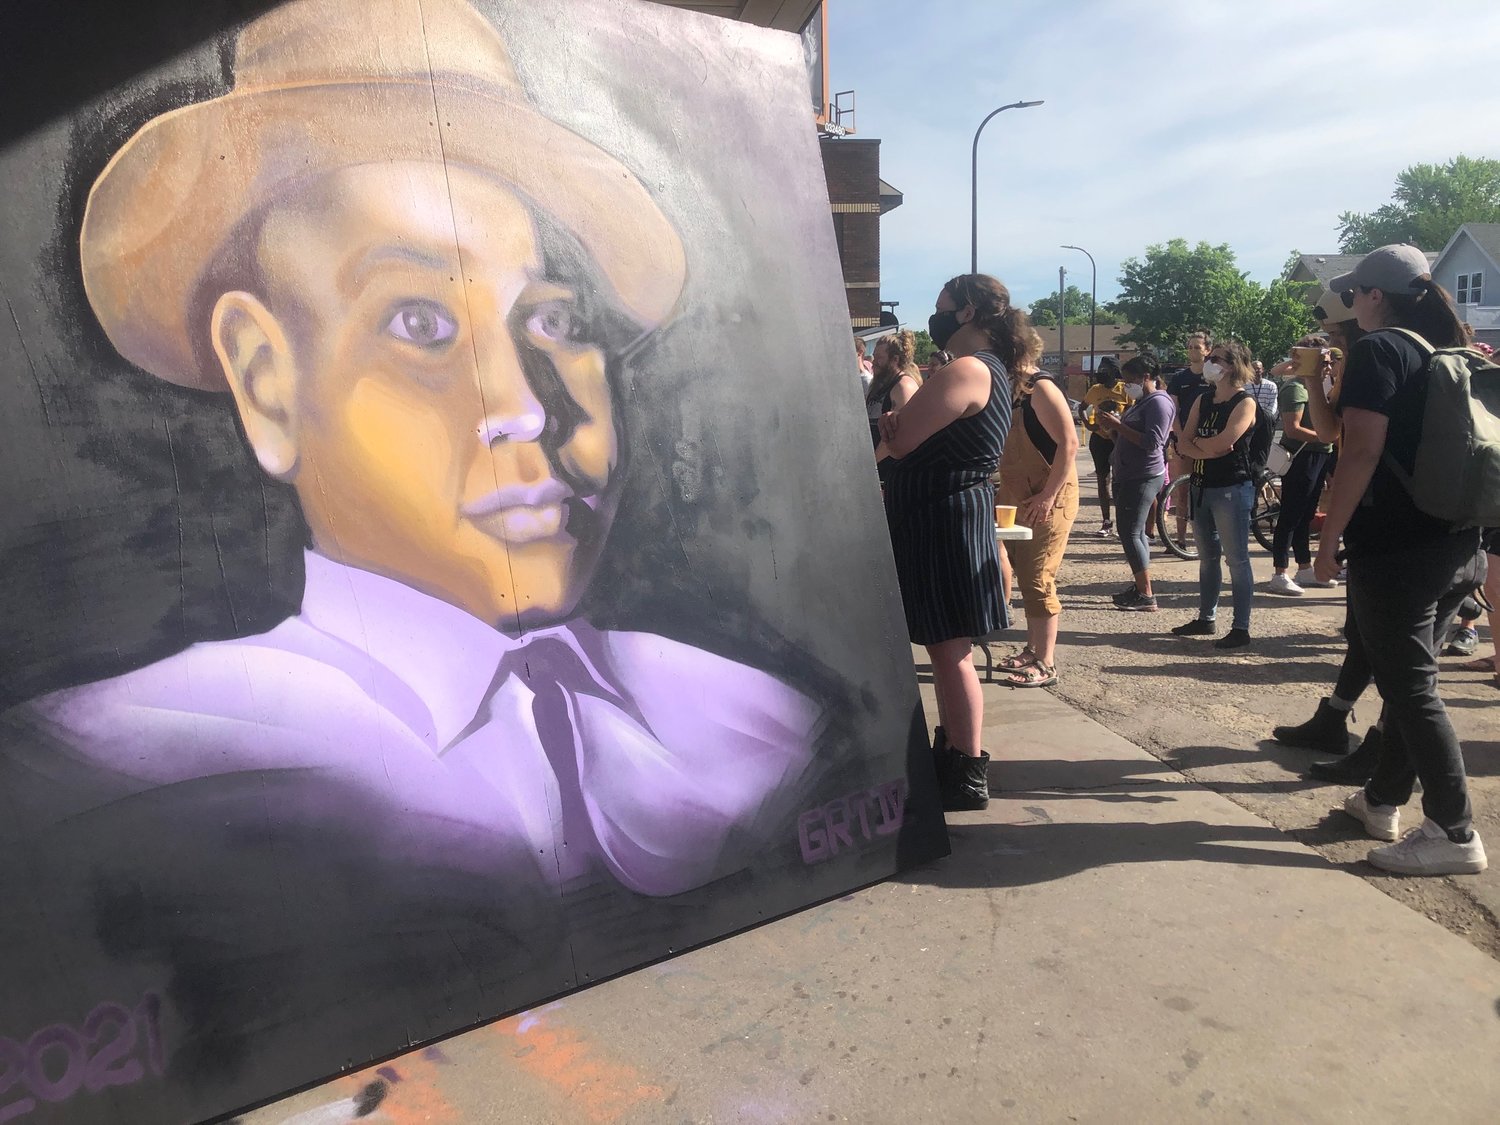 A new portrait of Emmett Till is installed at the Square. (Photo by Jill Boogren)